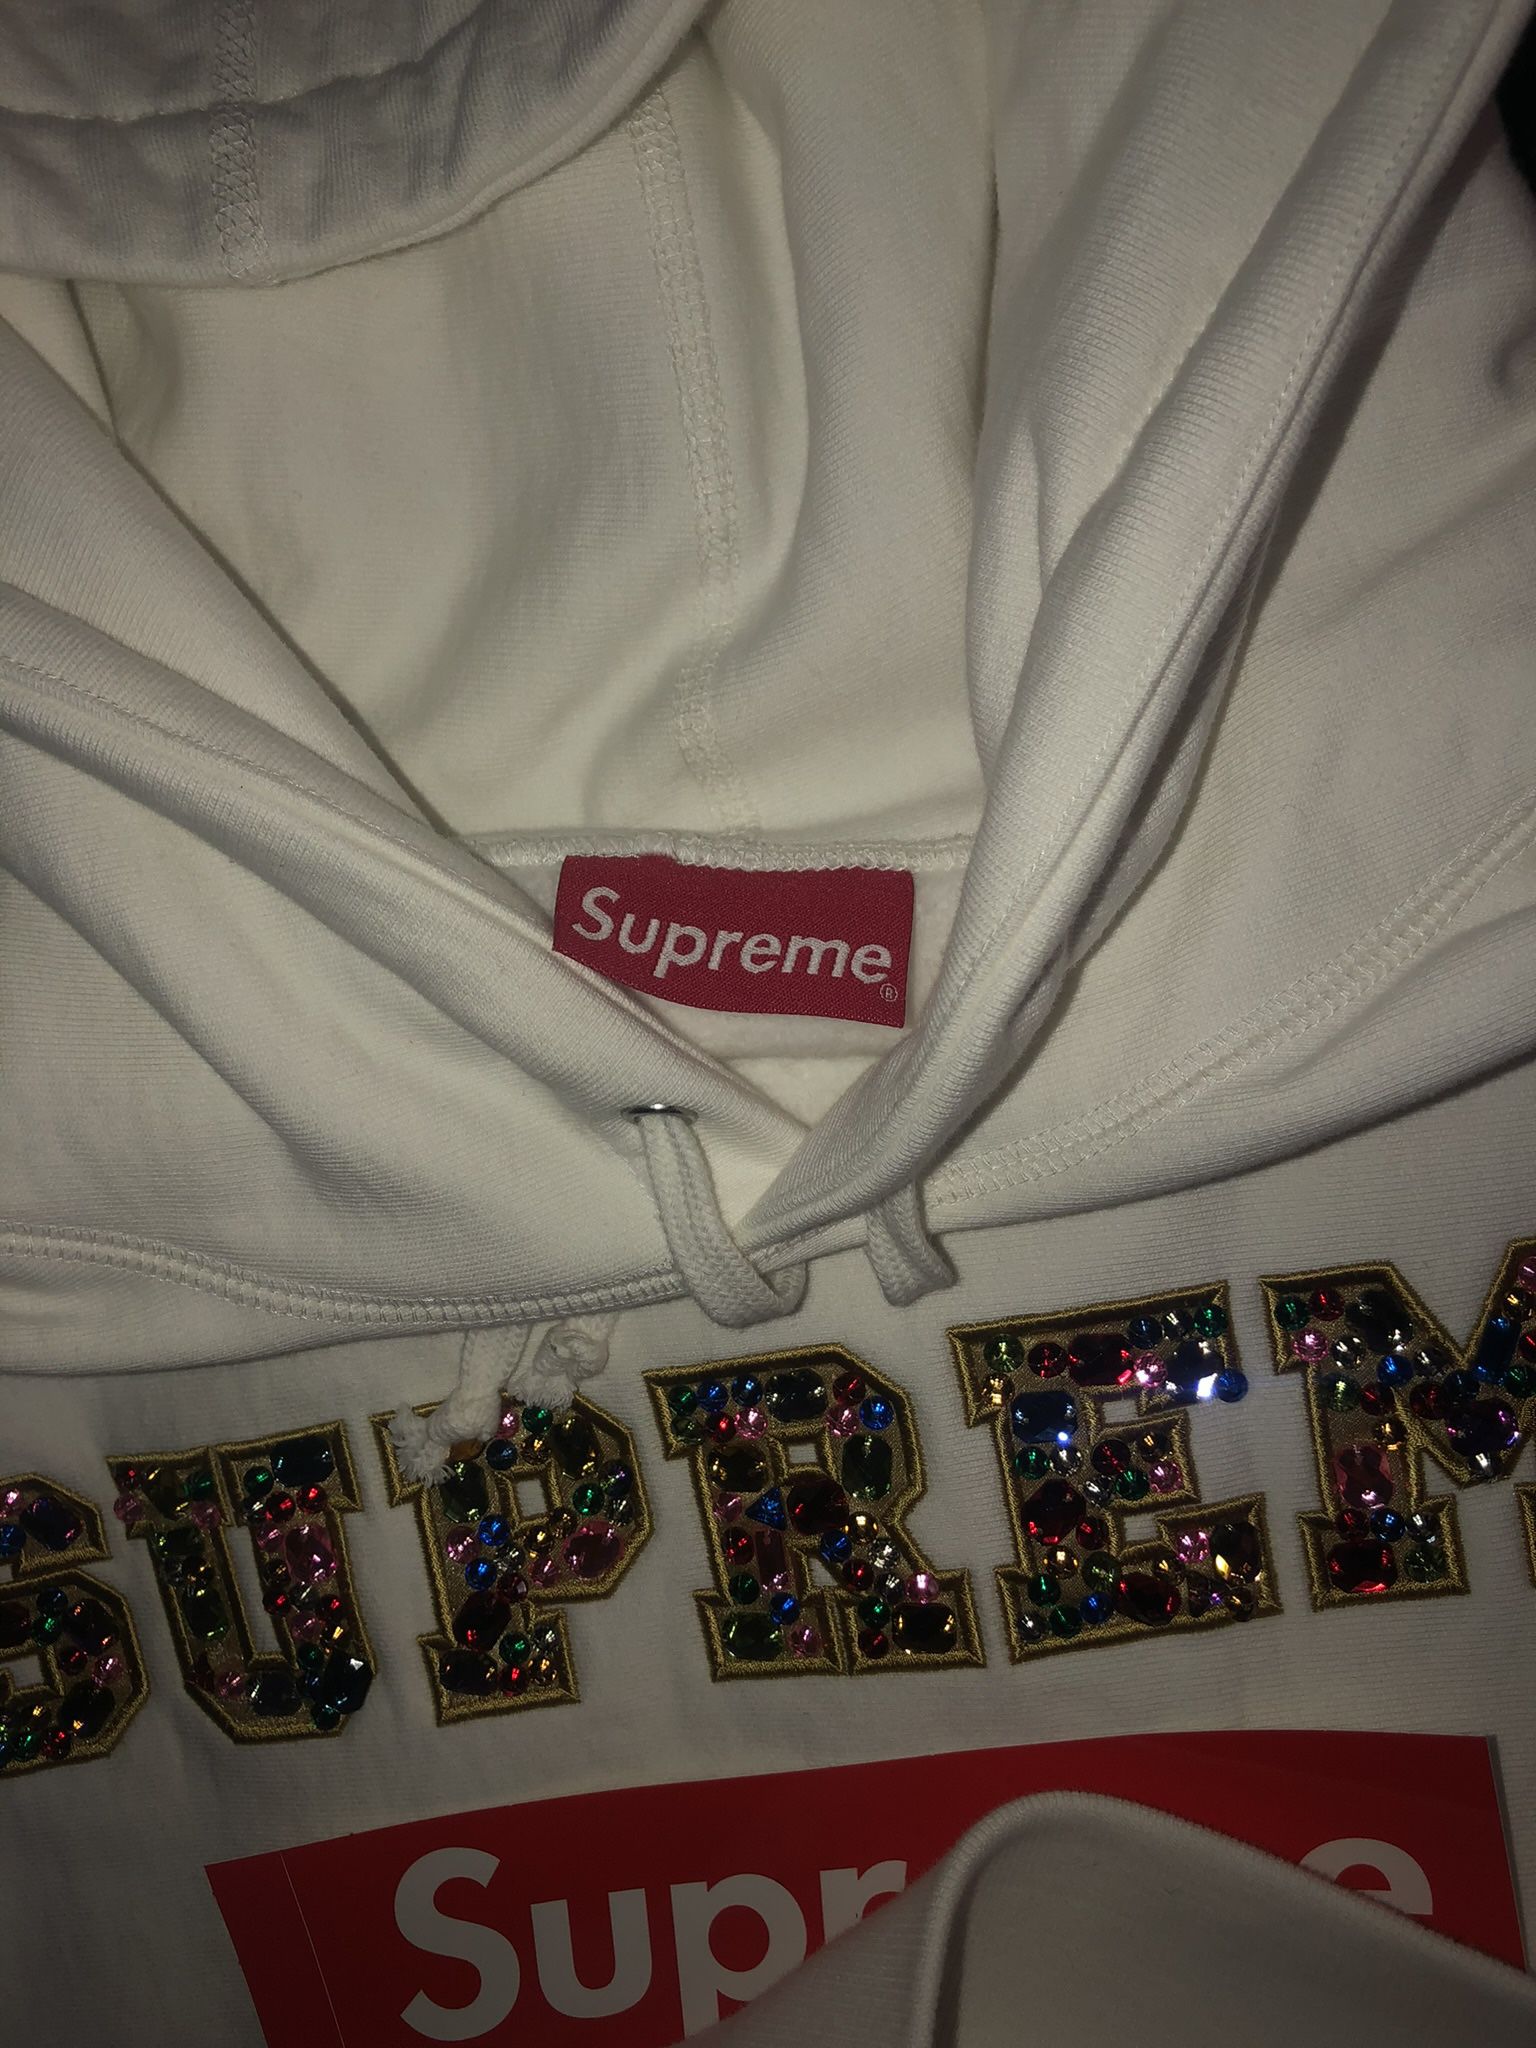 Supreme pearls Woman Jackets  Size Large.! 350$ 